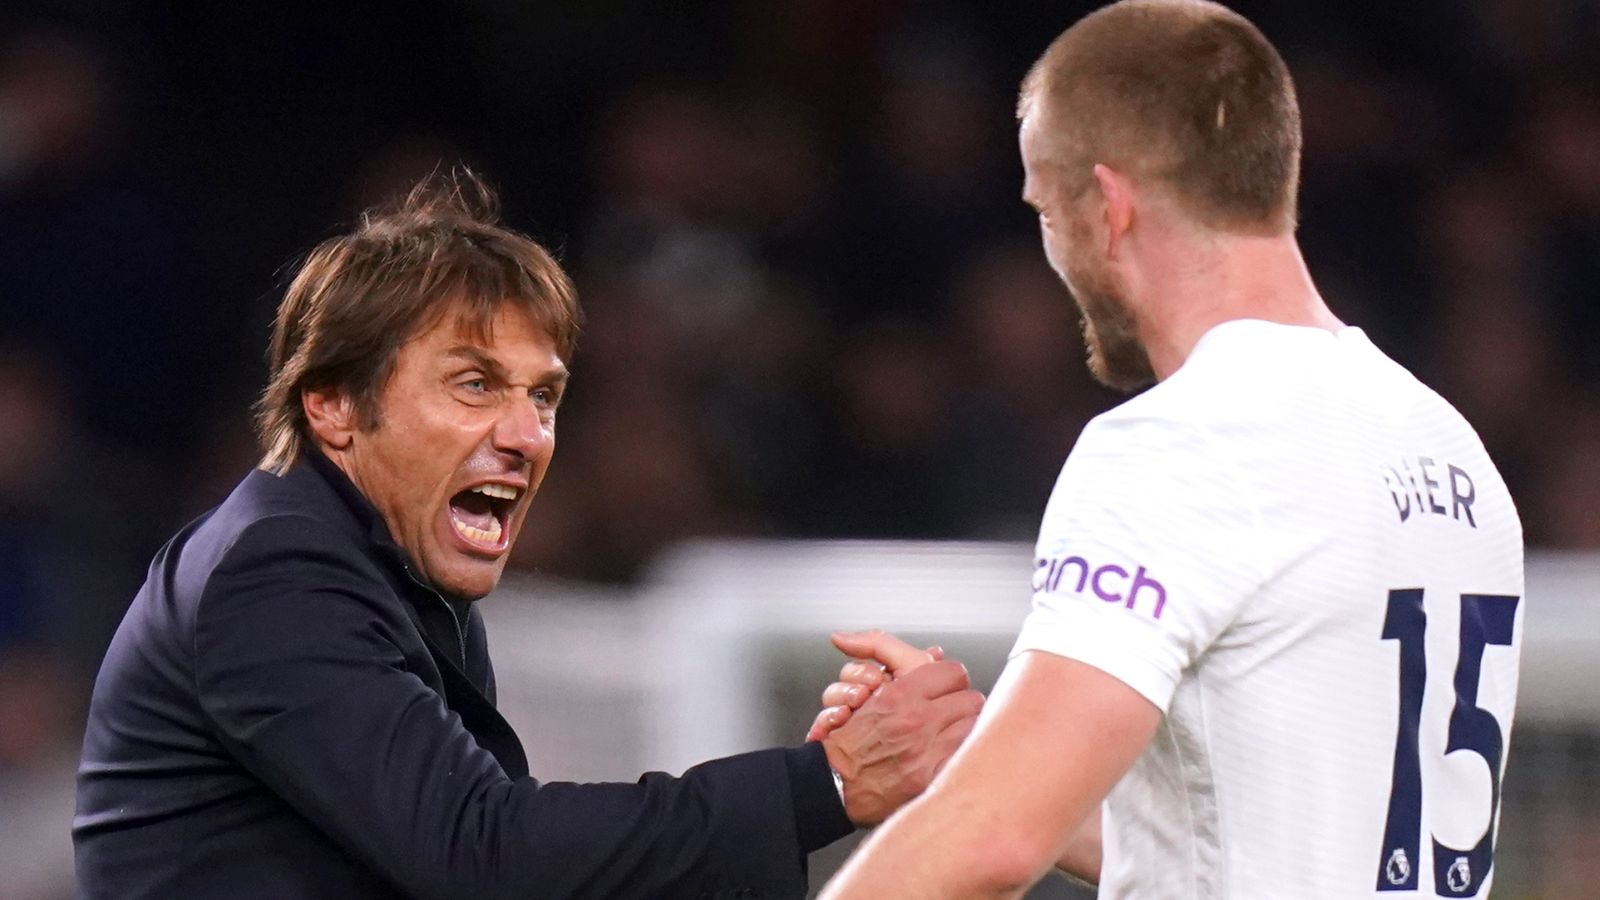 Tottenham training is tough under Antonio Conte but head coach's fear factor is overhyped, says Eric Dier